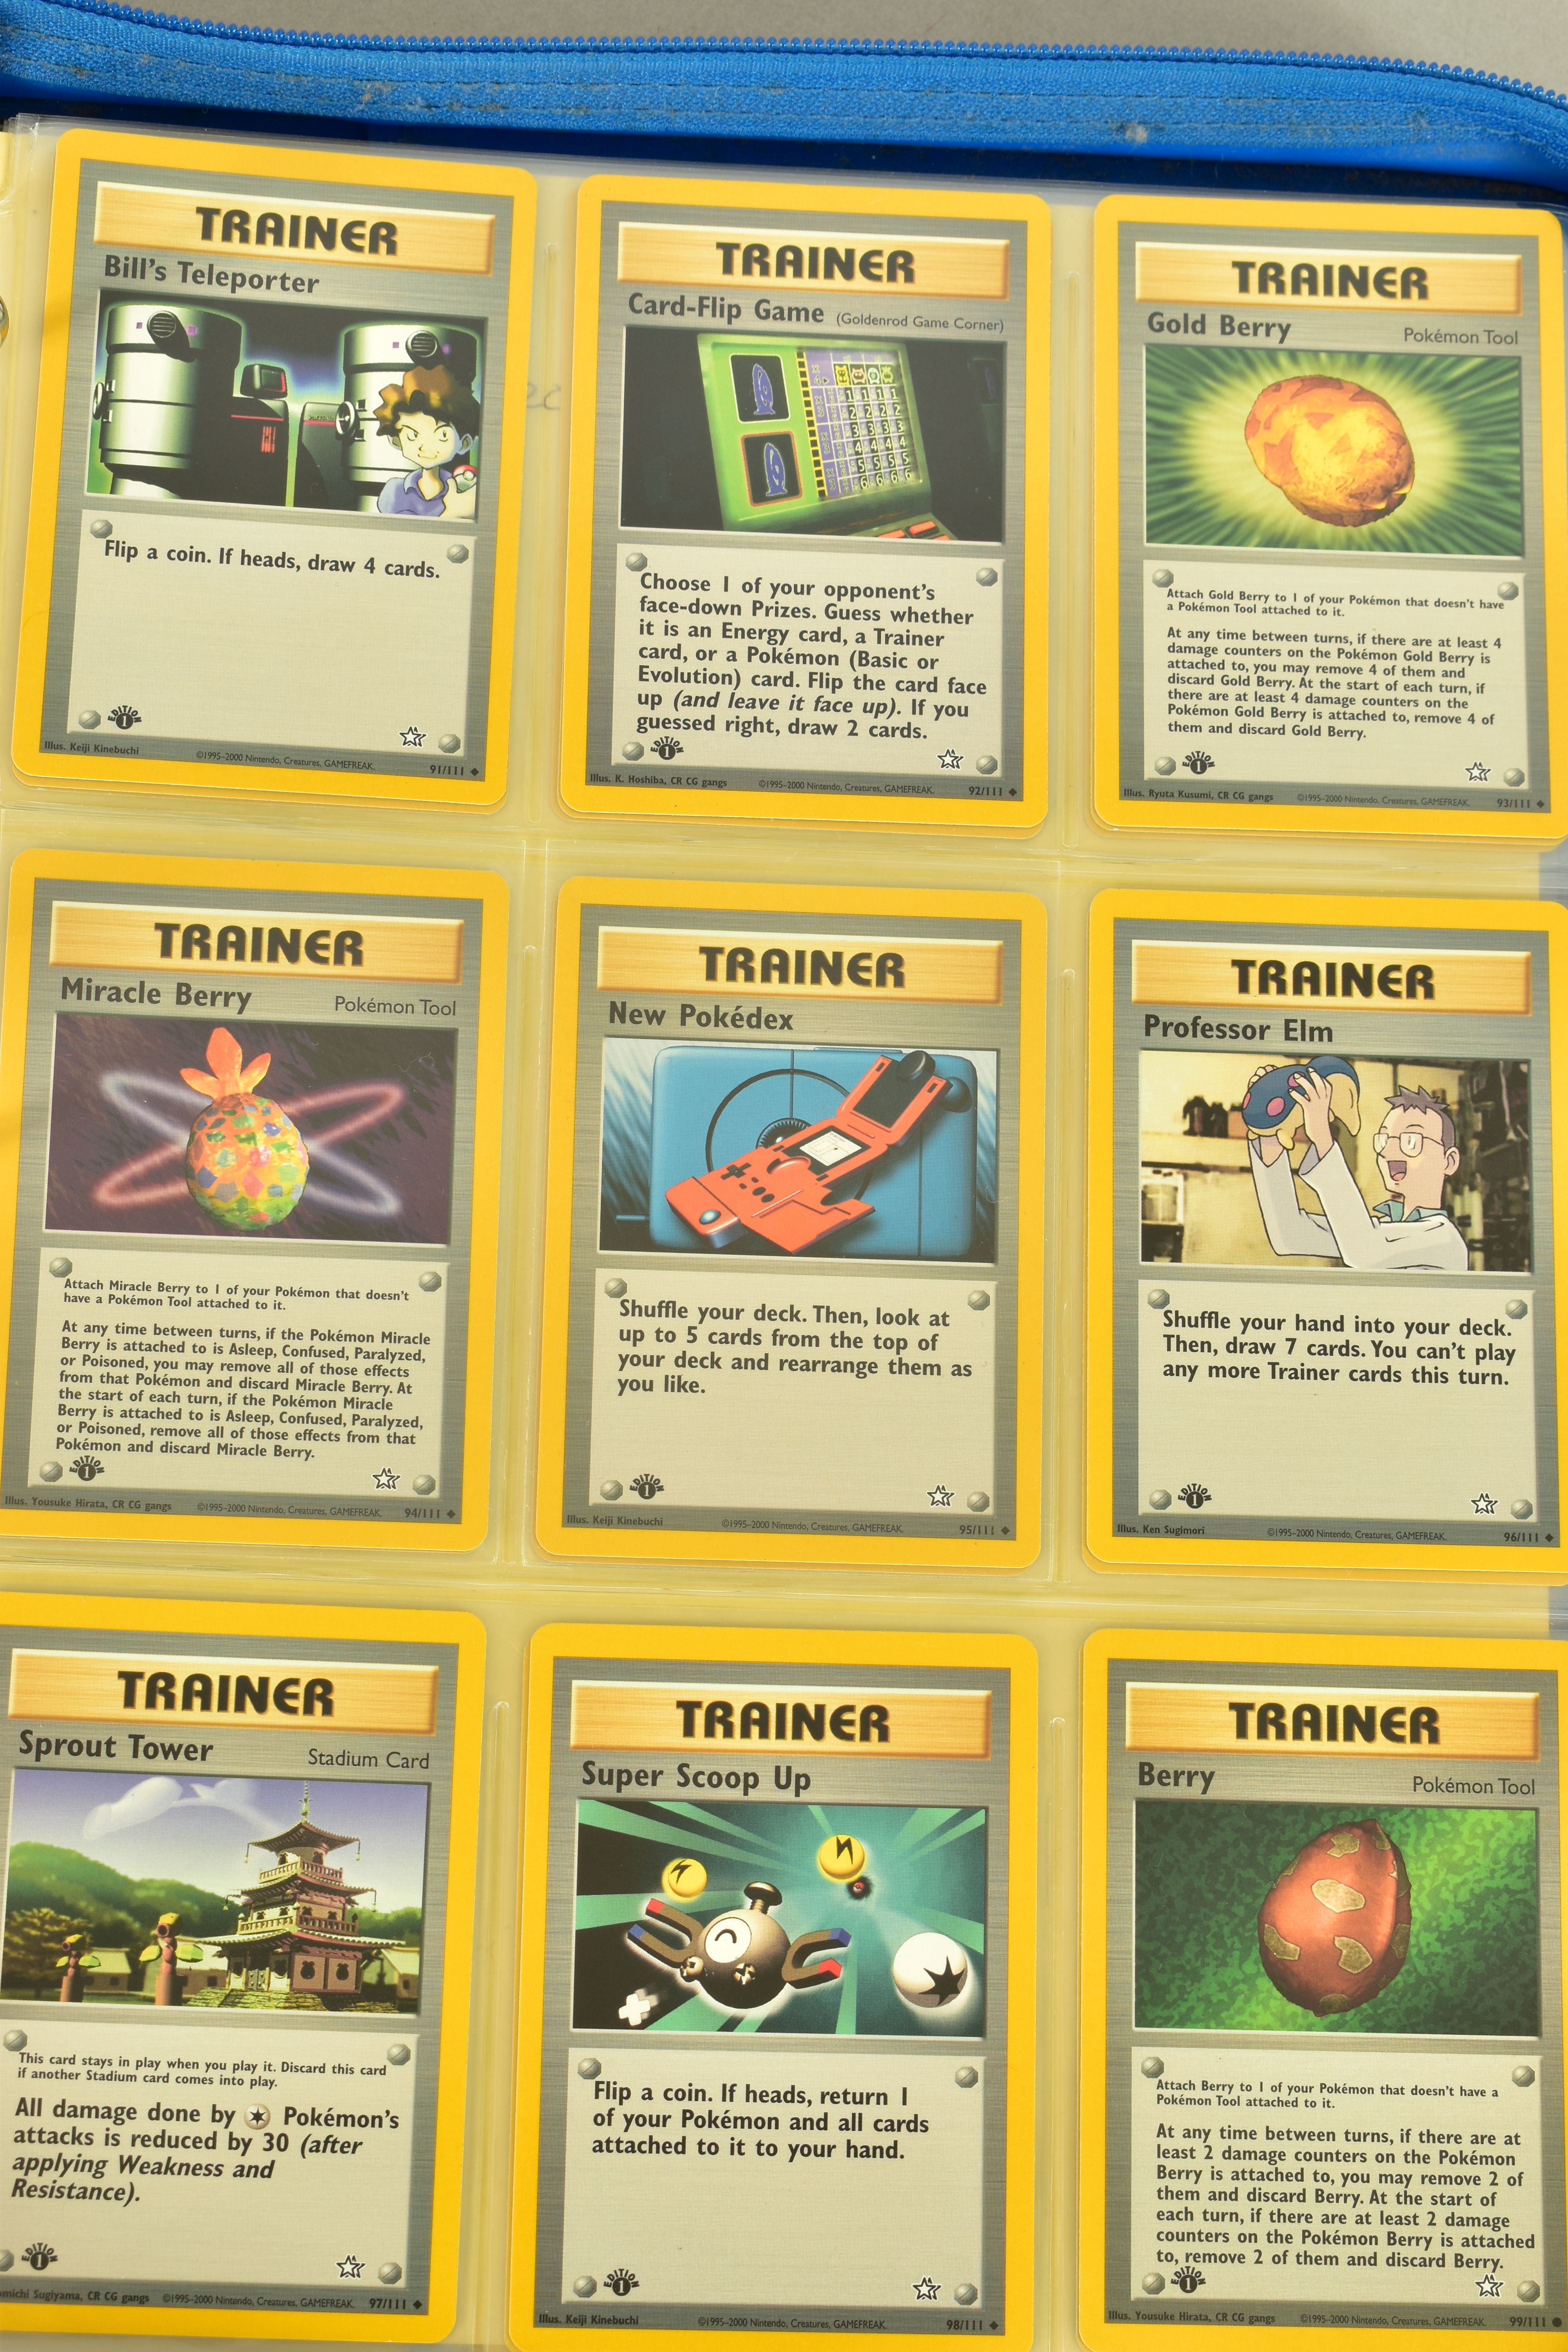 THE COMPLETE POKEMON CARD NEO GENESIS AND NEO DISCOVERY SETS, containing many first edition cards. - Image 17 of 32